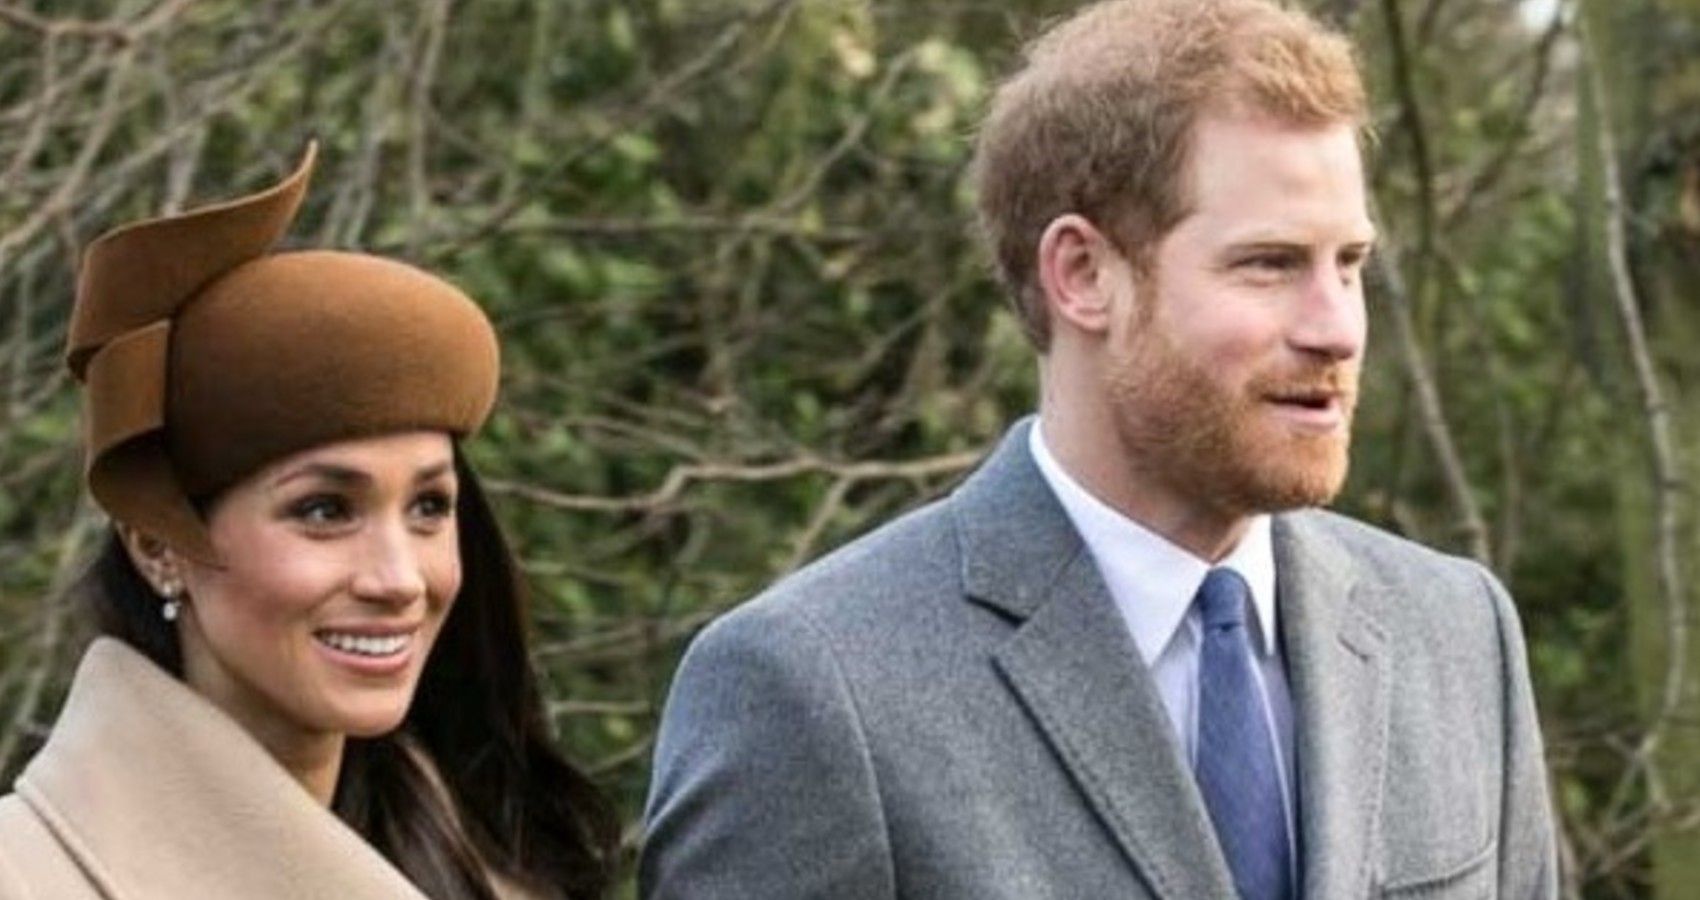 Prince Harry And Meghan Markle Smiling While Outside